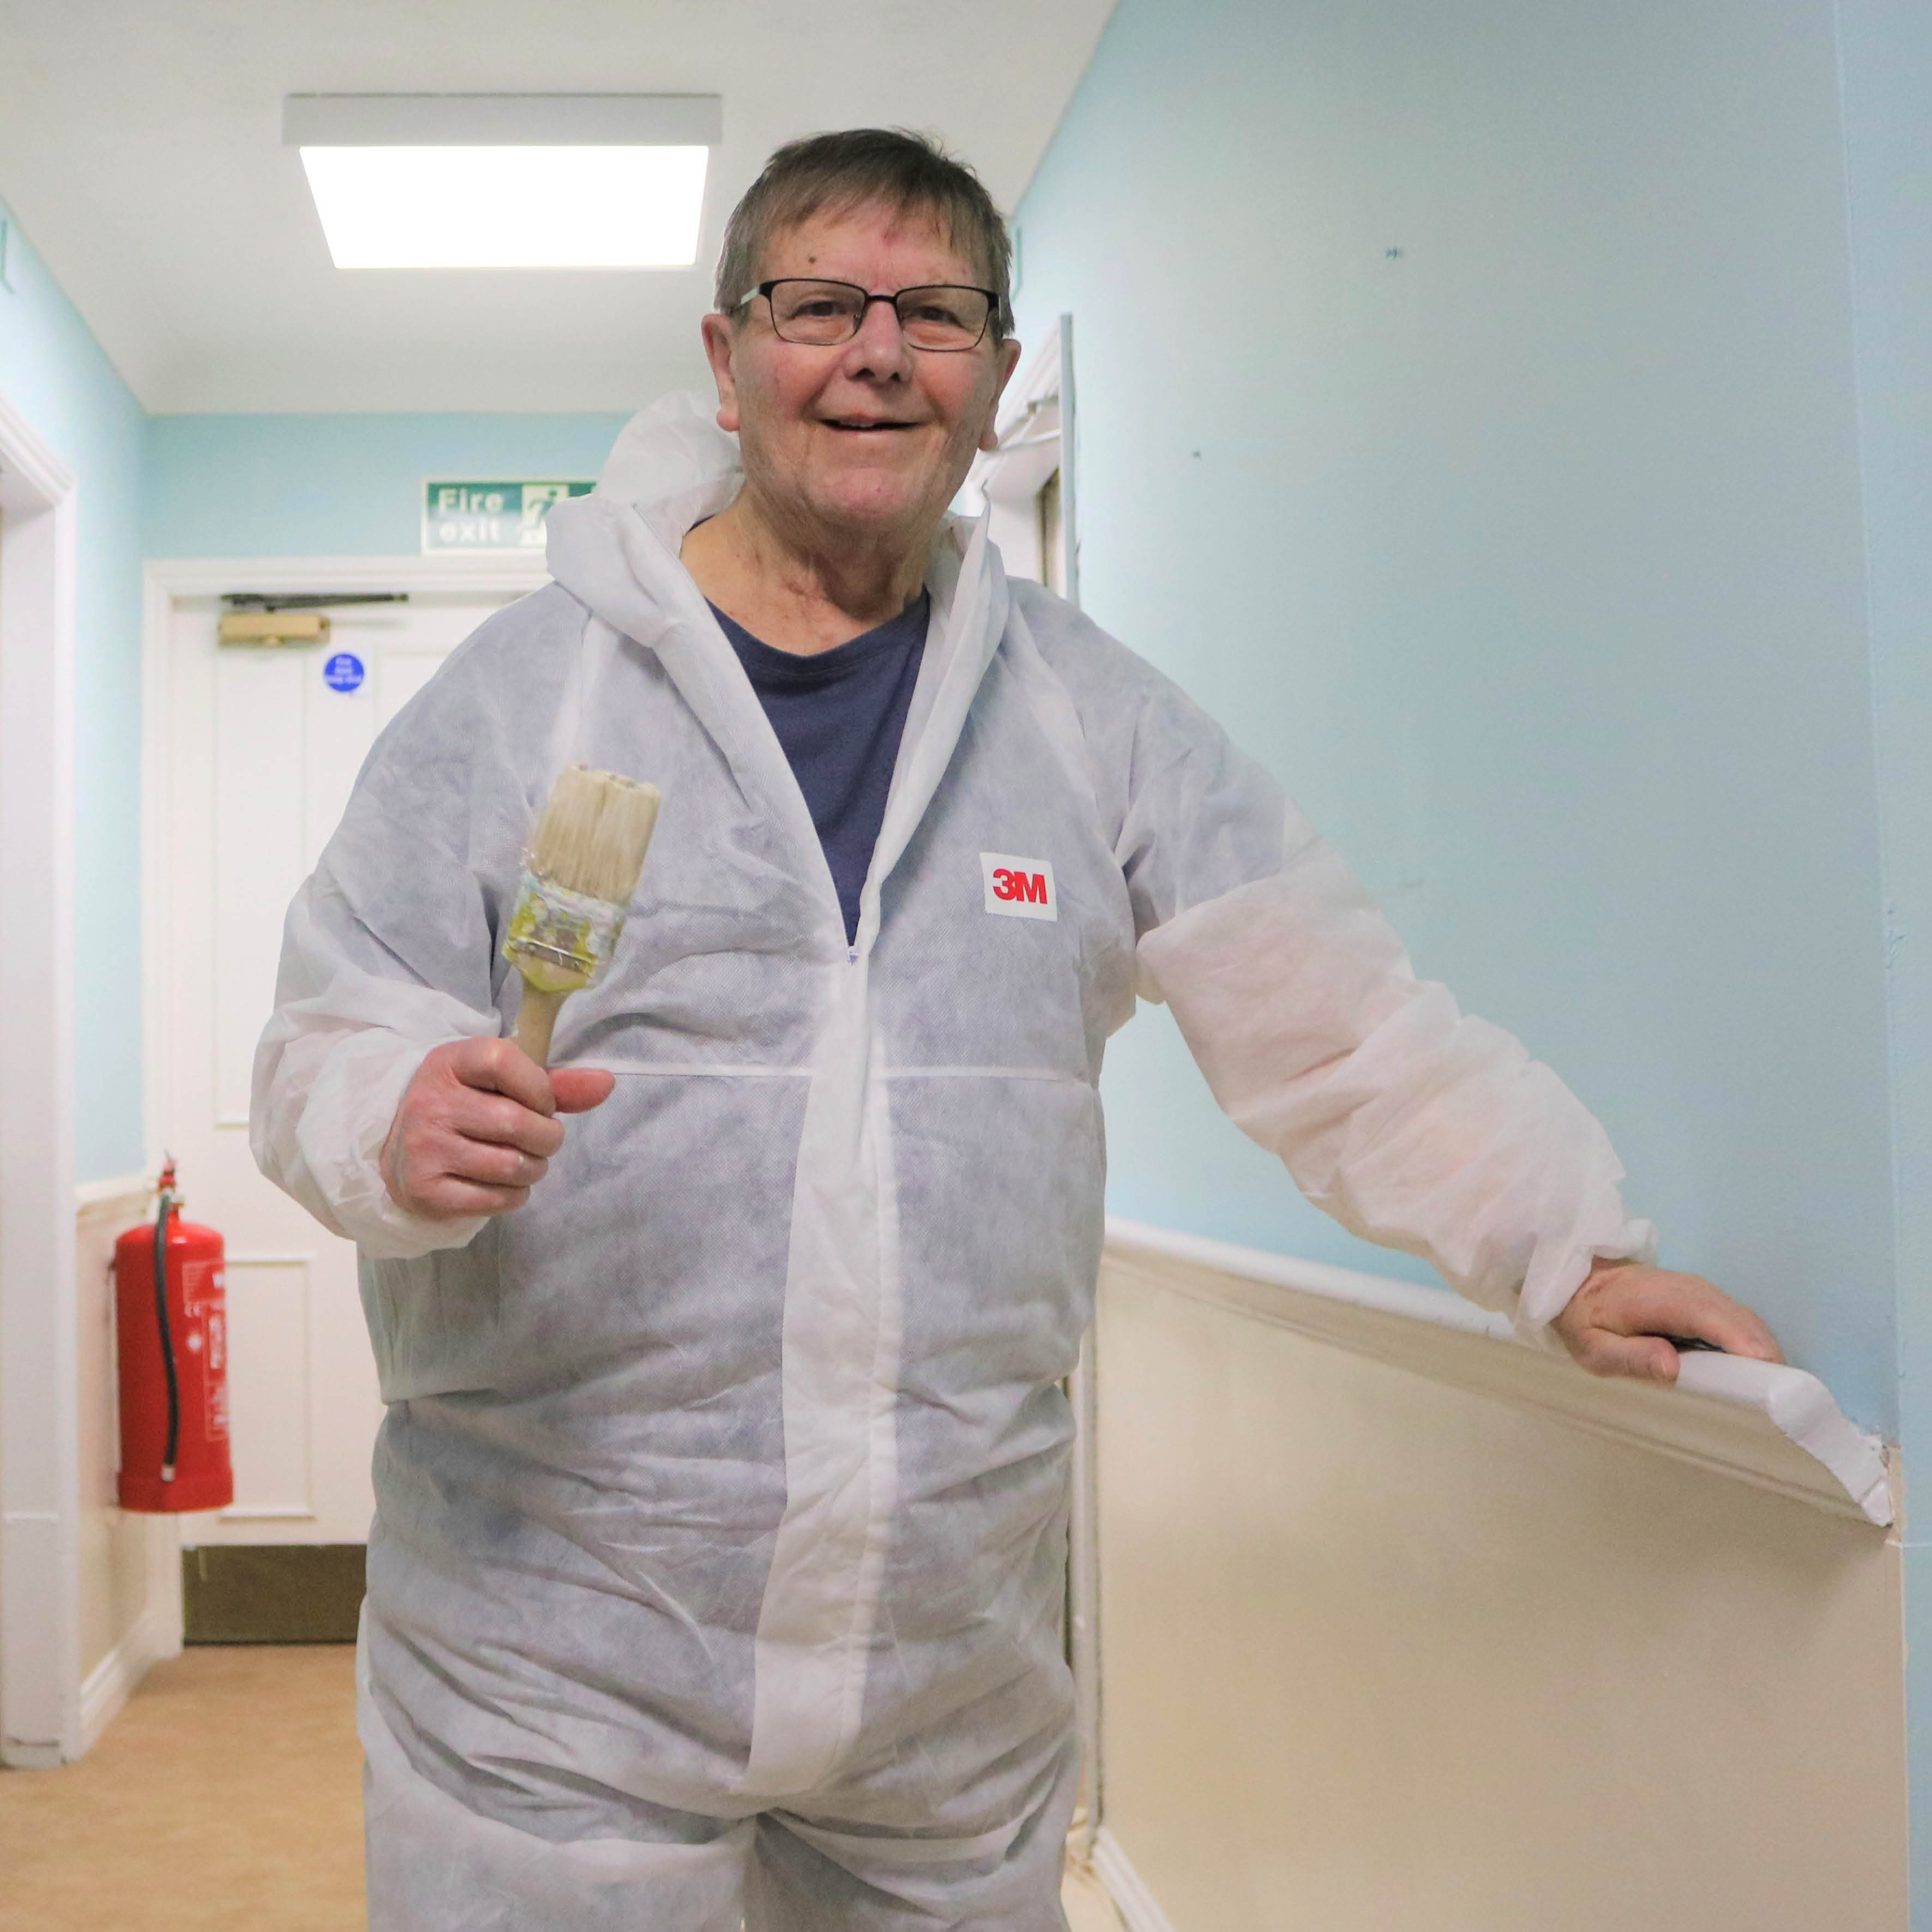 Johns Painting and Decorating Wish Comes True at Abbey Grange